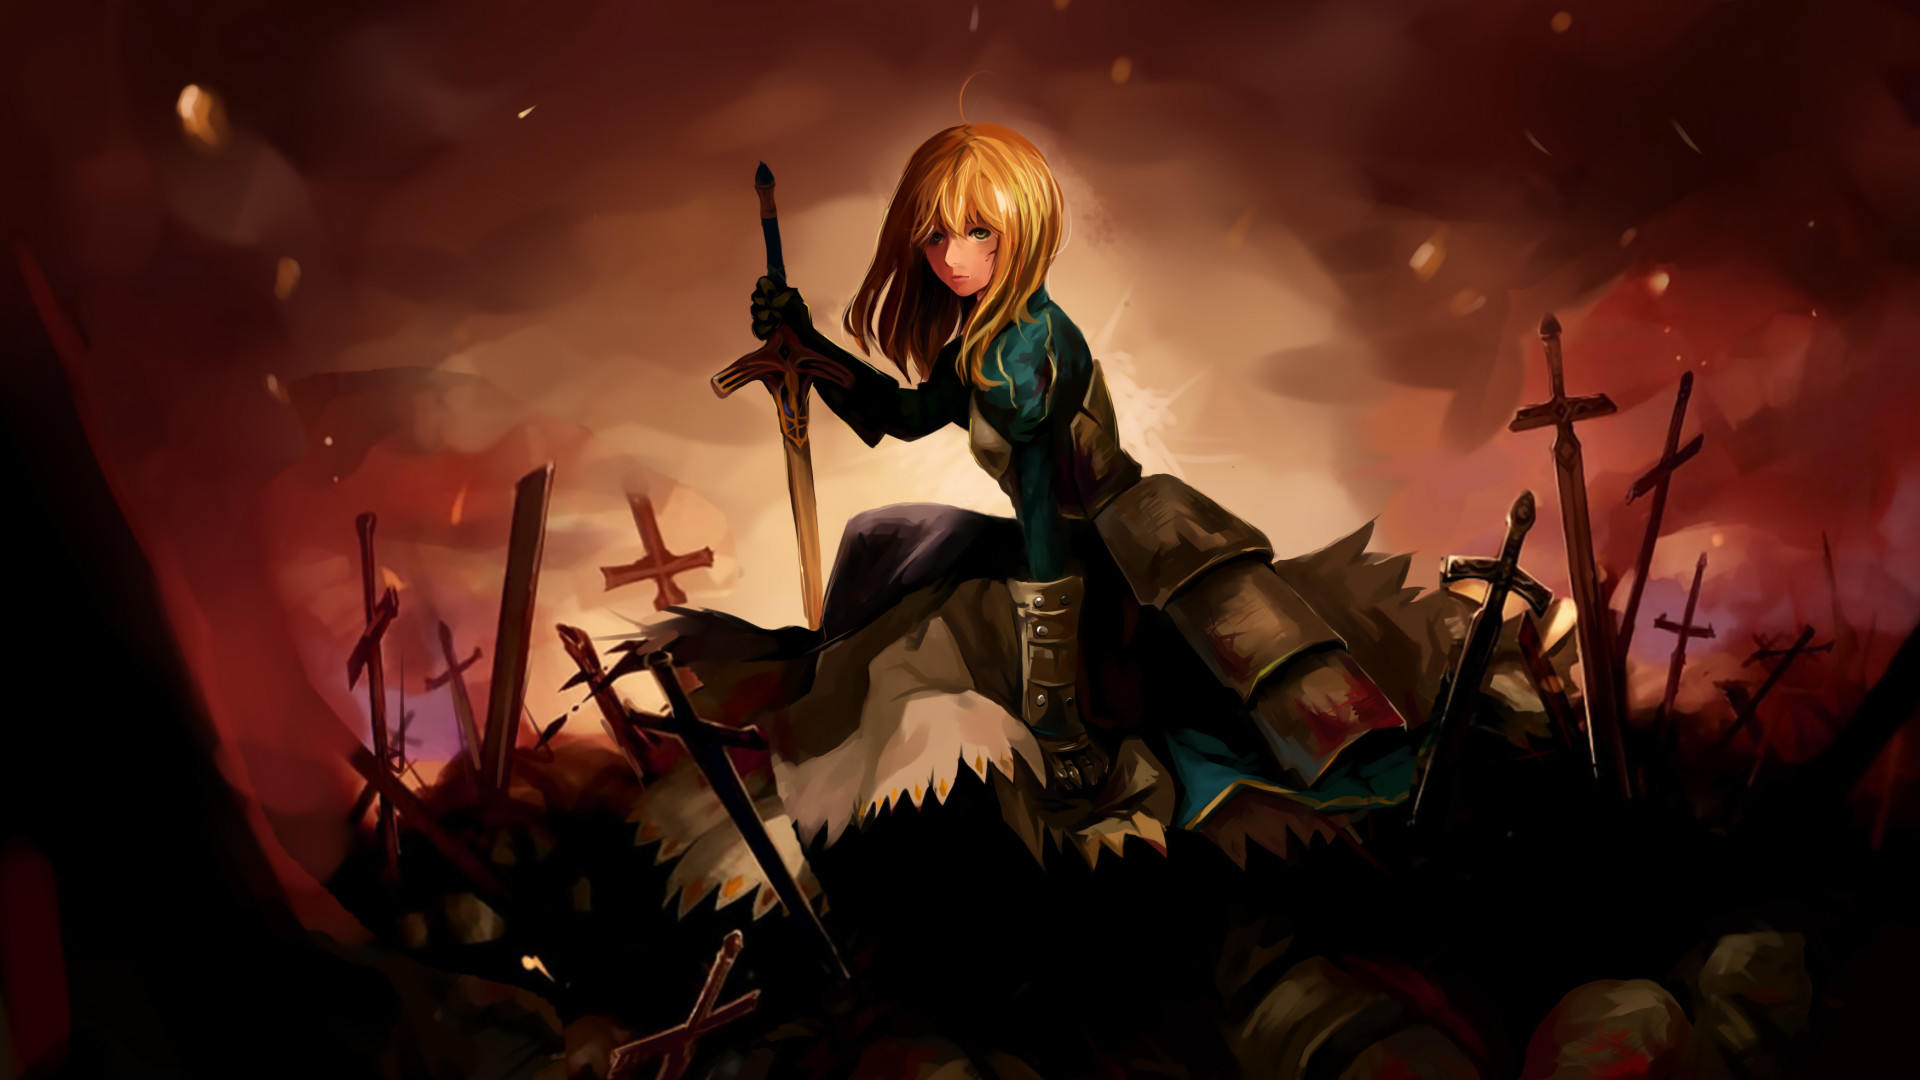 fate stay night saber wallpaper,cg artwork,illustration,darkness,anime,fictional character